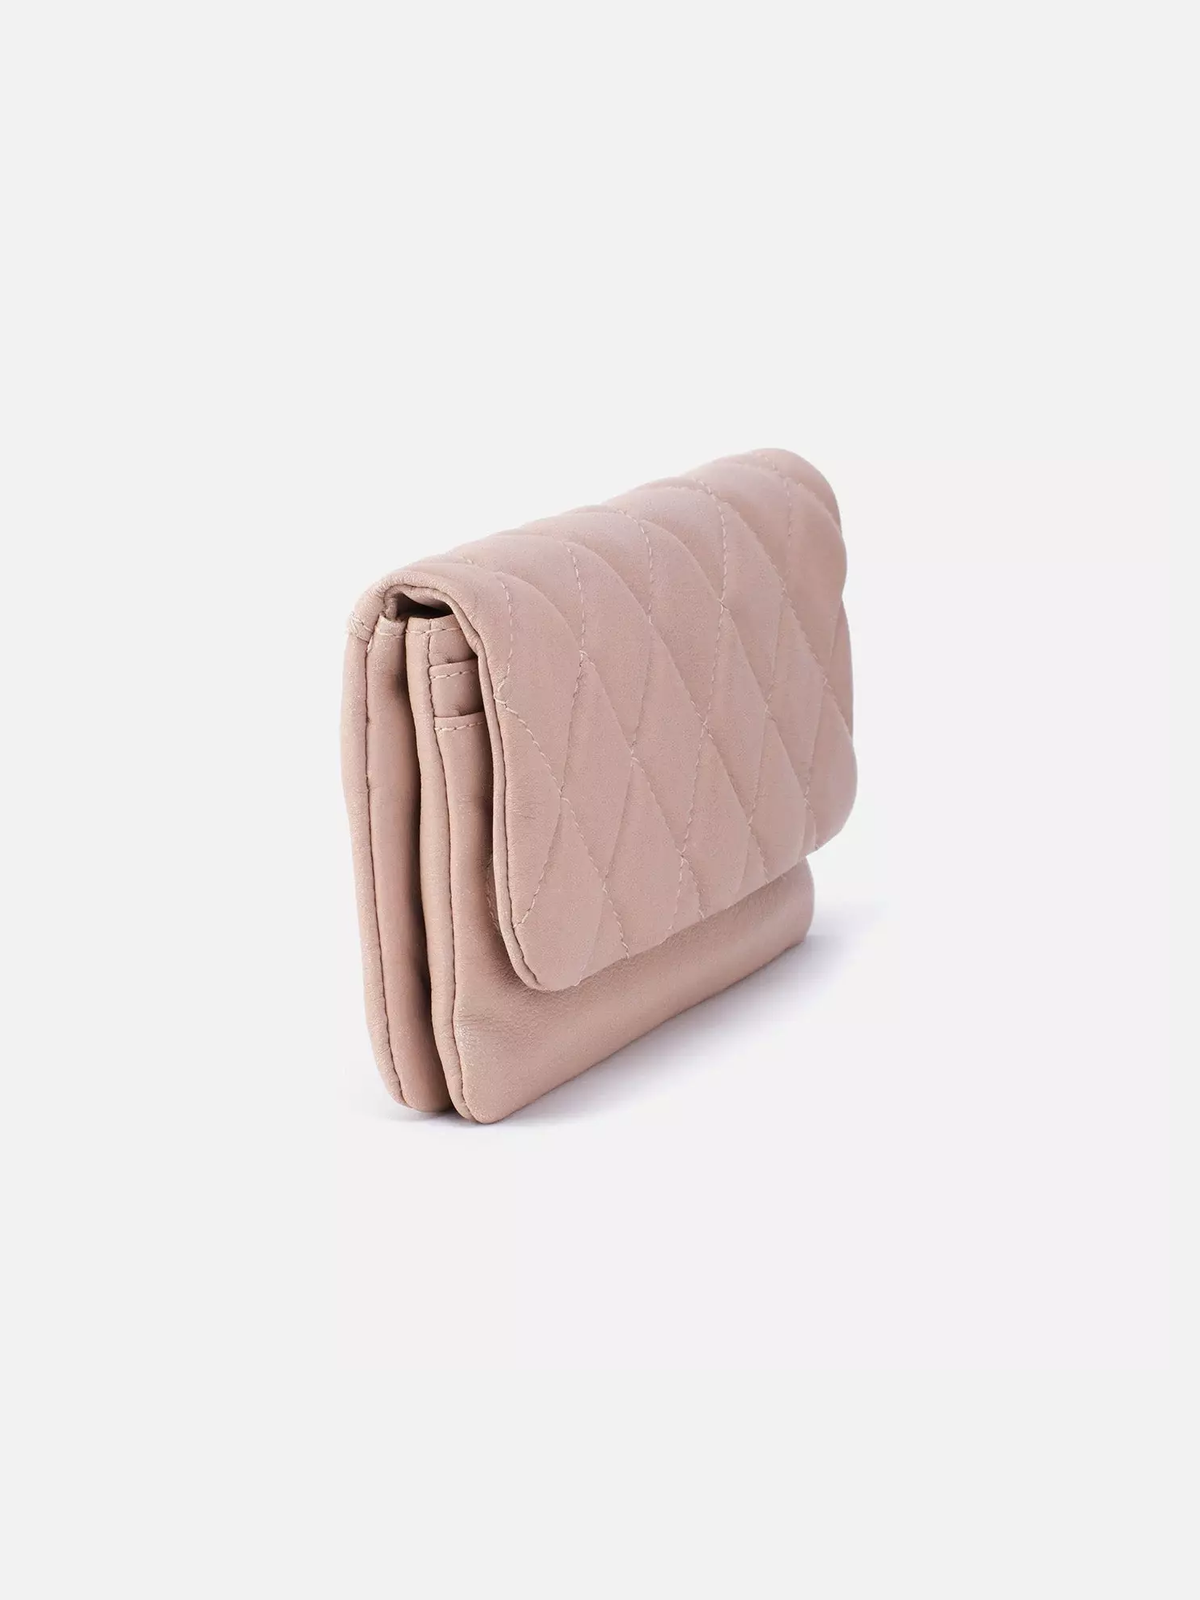 hobo advent continental wallet in rose soft hide